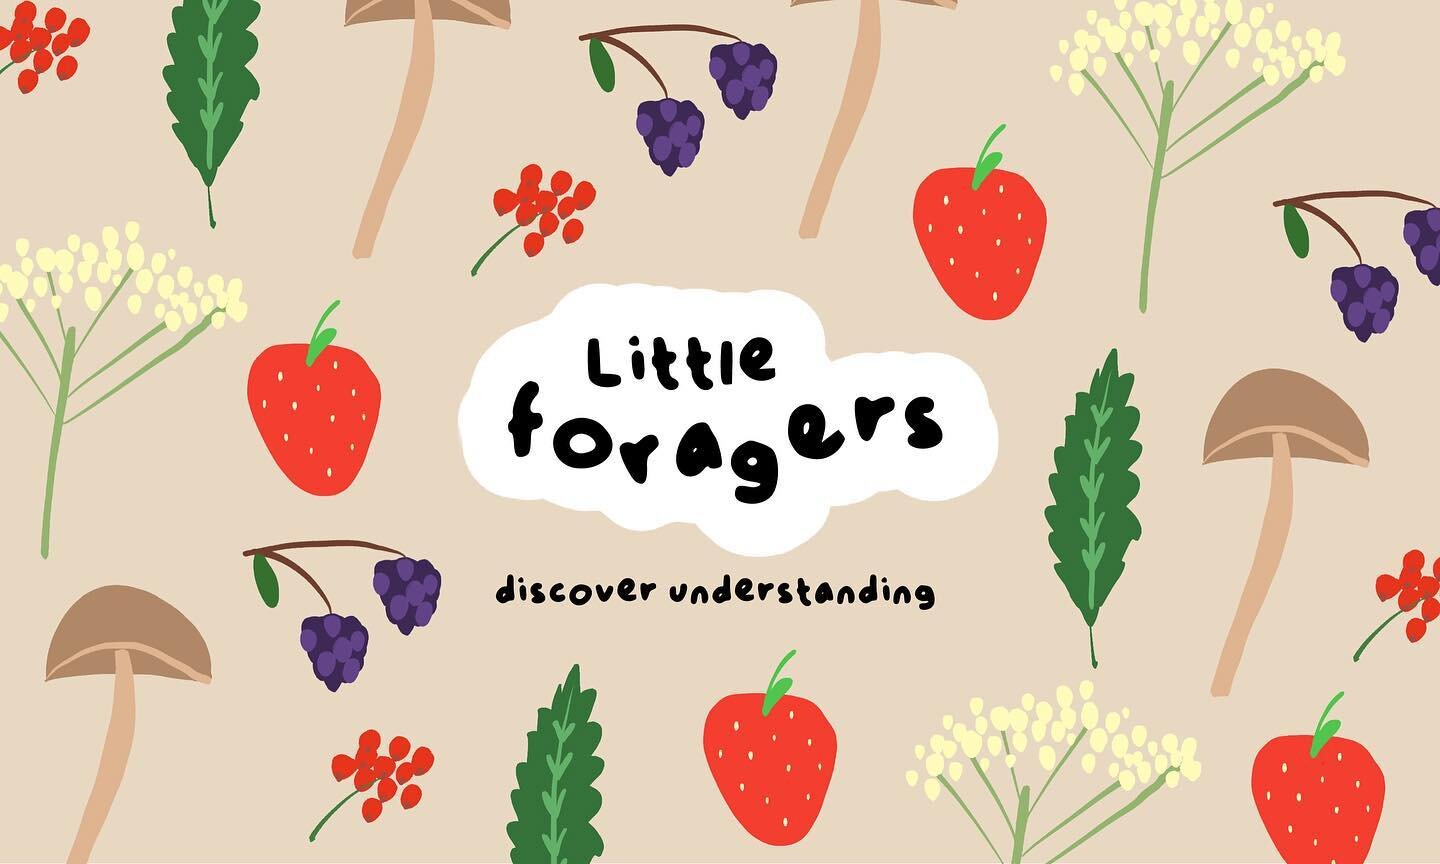 Little Foragers; educating children of foraging and natural sources of food. 🍓